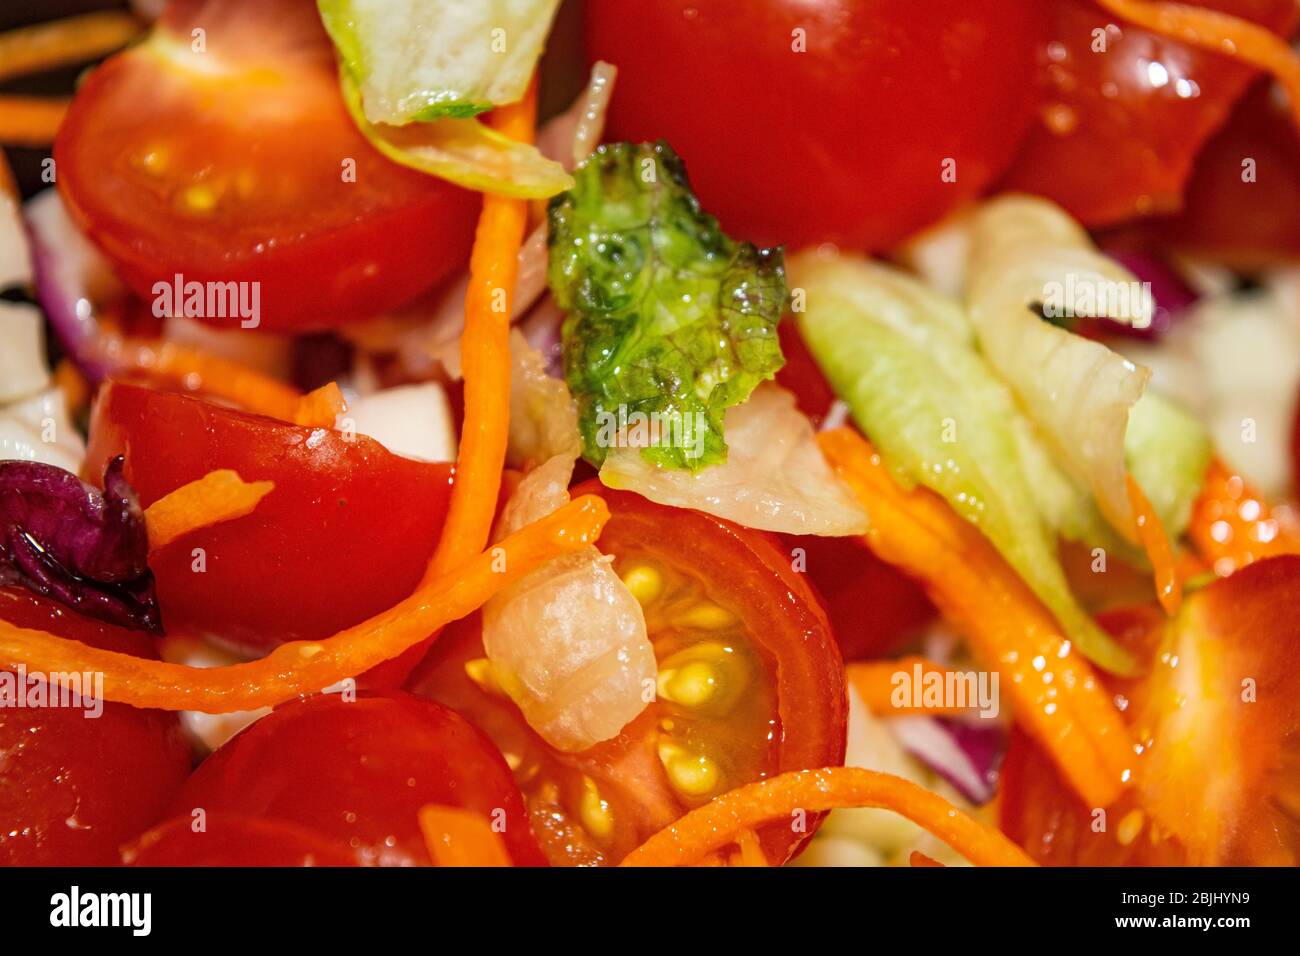 Vegetable salad sliced tomatoes, onions, lettuce, carrots and beets. Close up. Healthy food and fitness diet Stock Photo